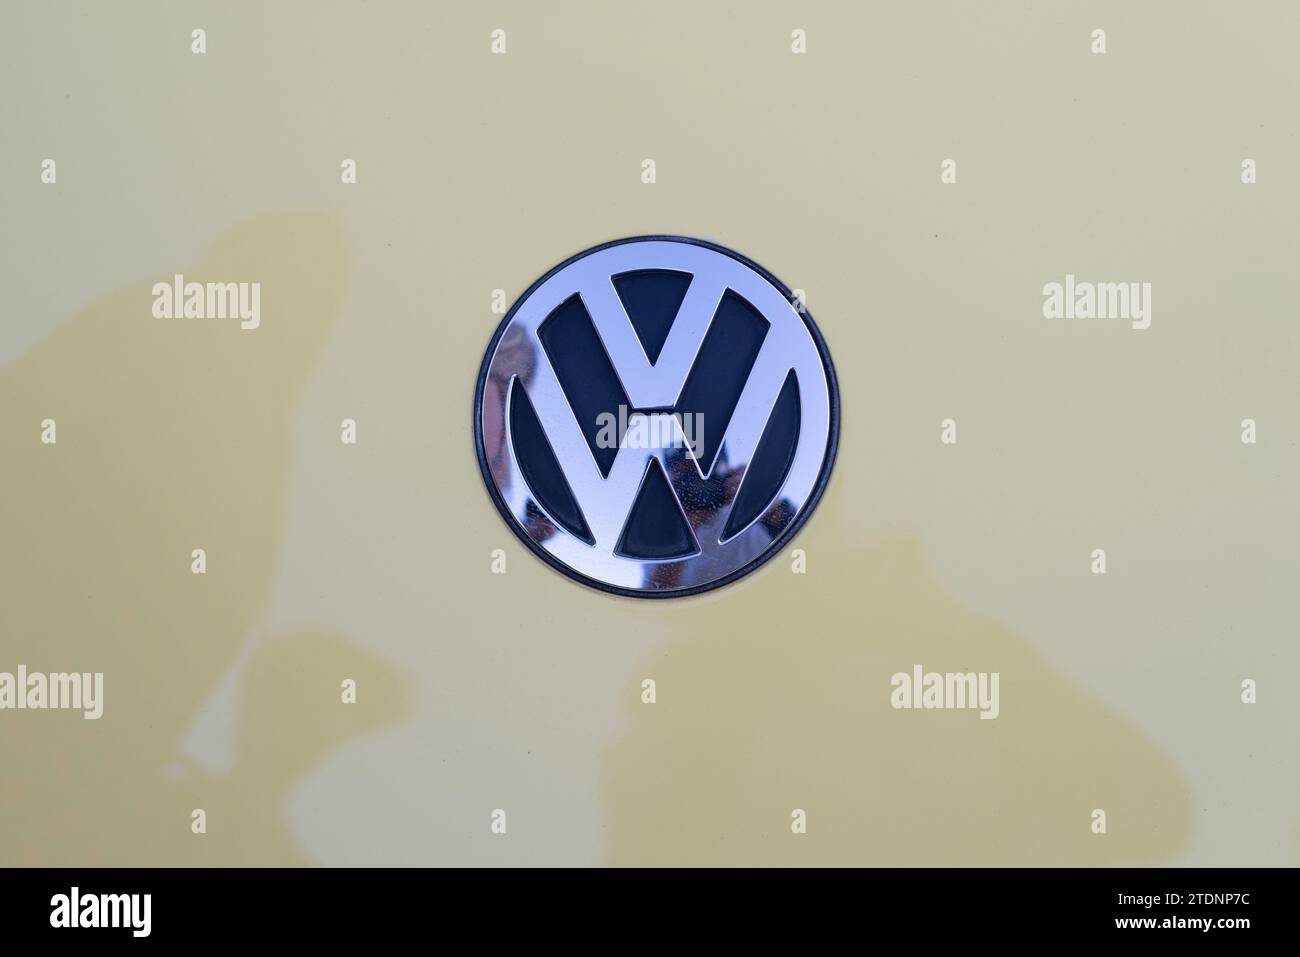 Salvador, Bahia, Brazil - December 02, 2023: Detail of the symbol of a Volkswagen car on display in the city of Salvador, Bahia. Stock Photo